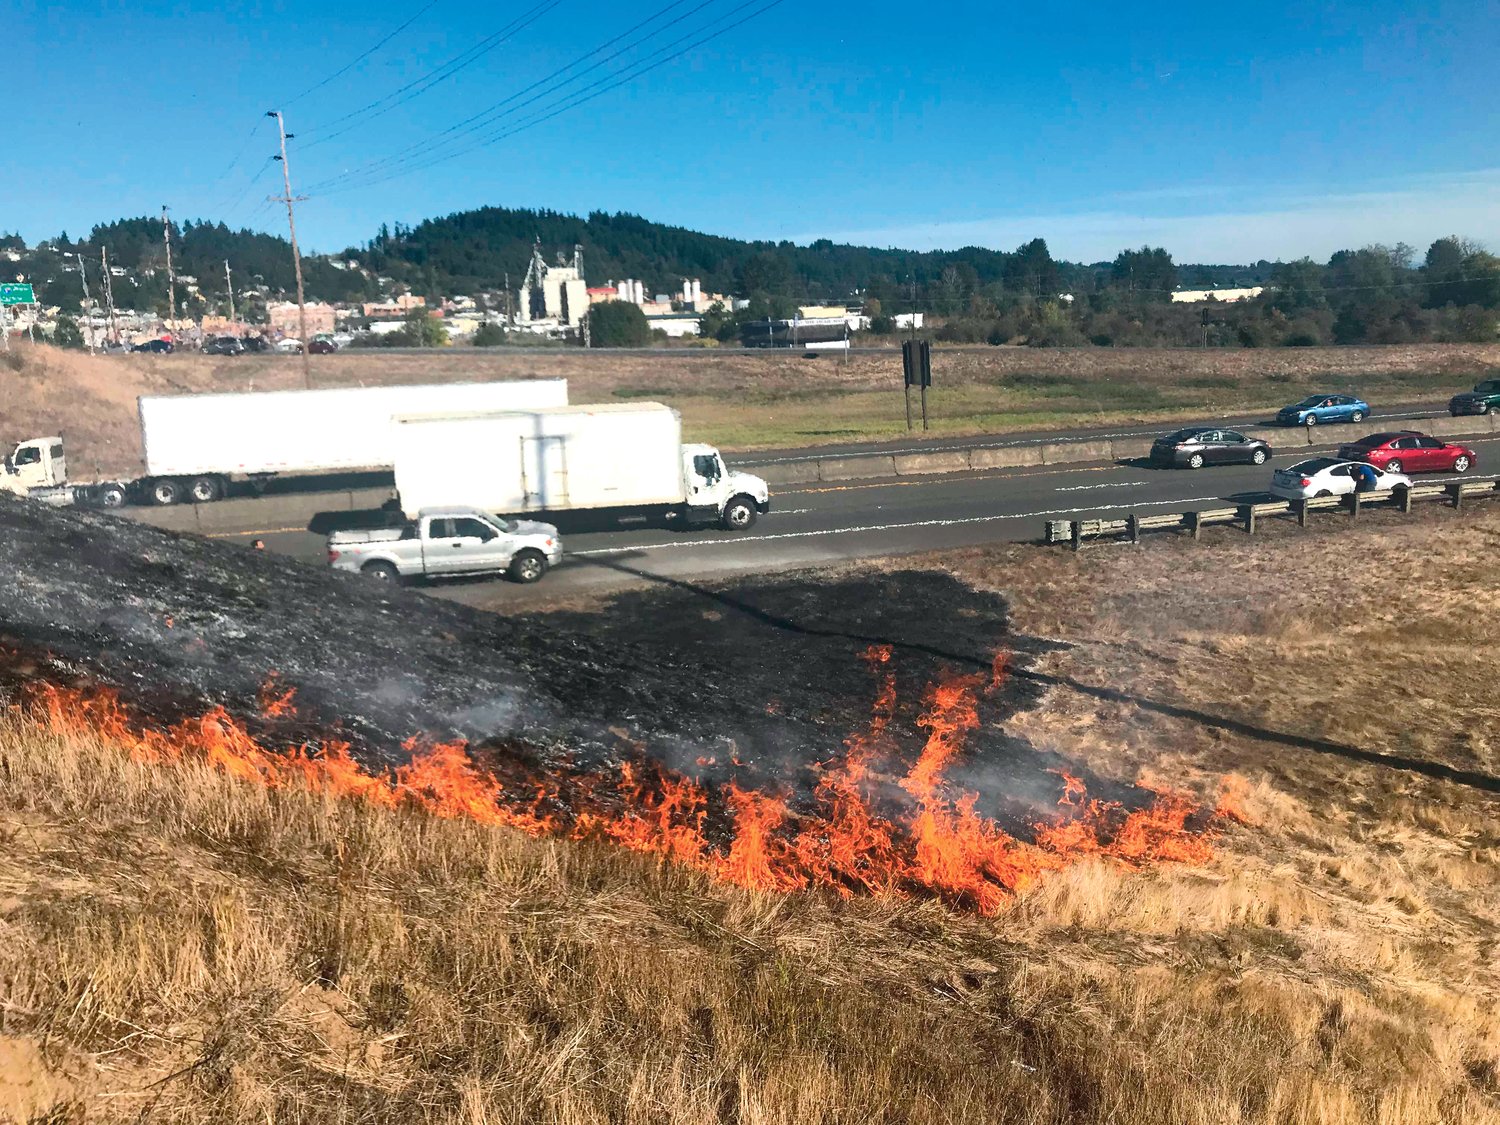 A brush fire broke out alongside Interstate 5 near Exit 77 in Chehalis on Tuesday.